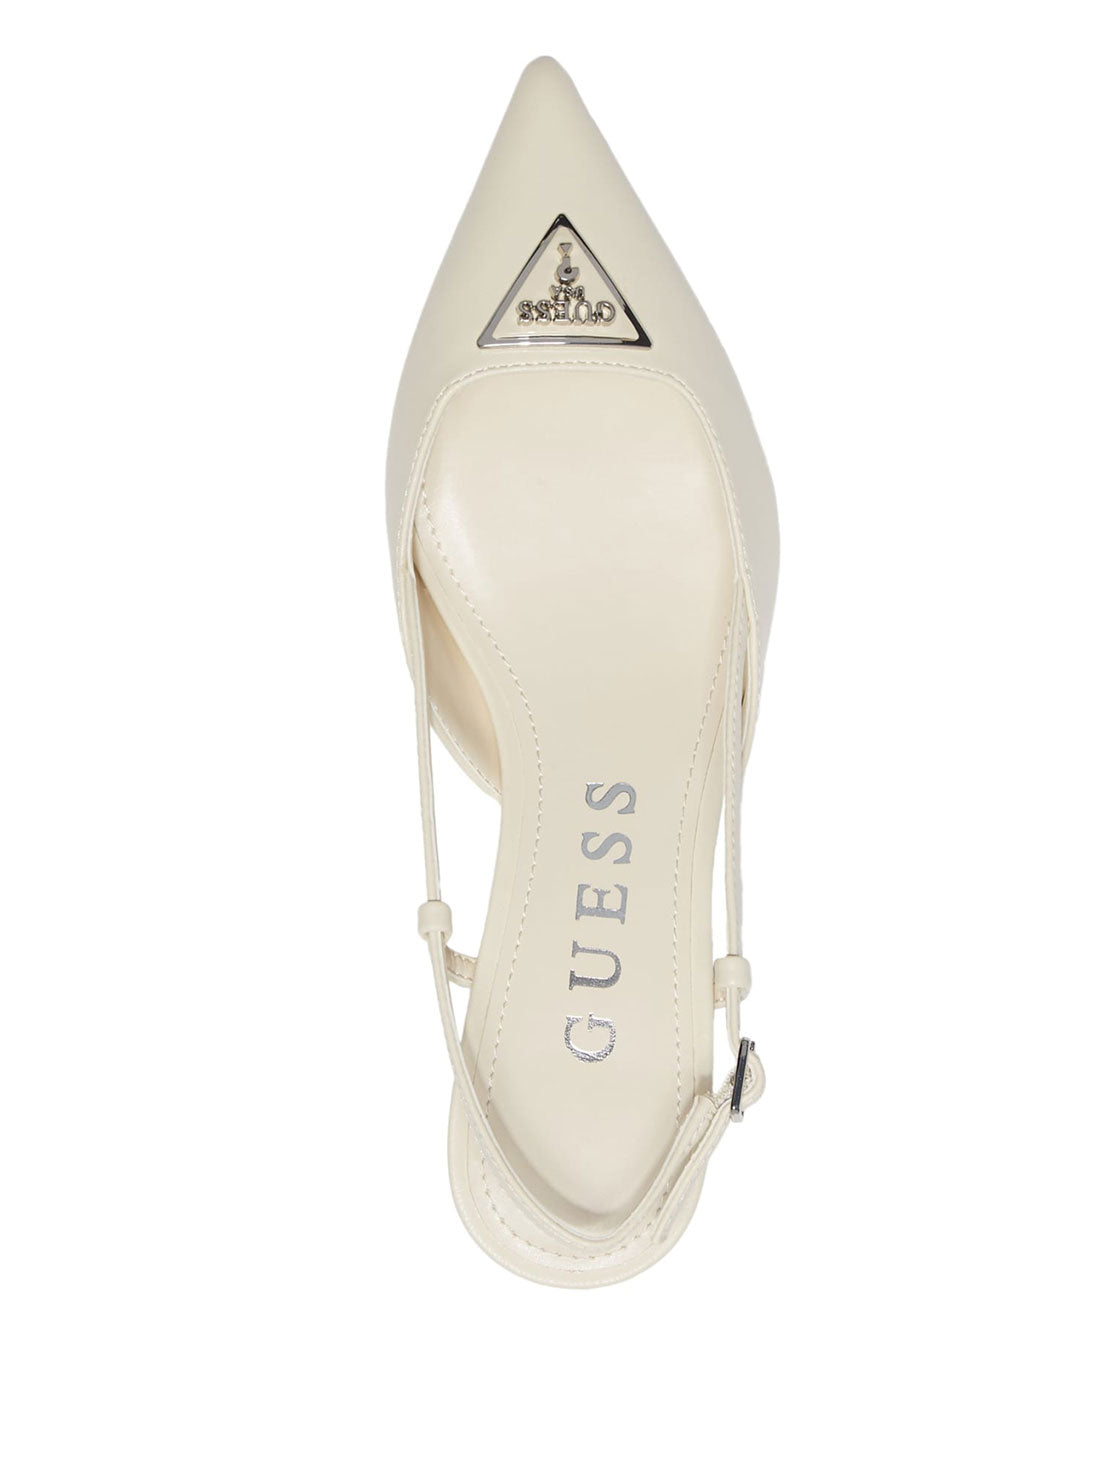 GUESS White Jesson Sling Back Kitten Heels top view